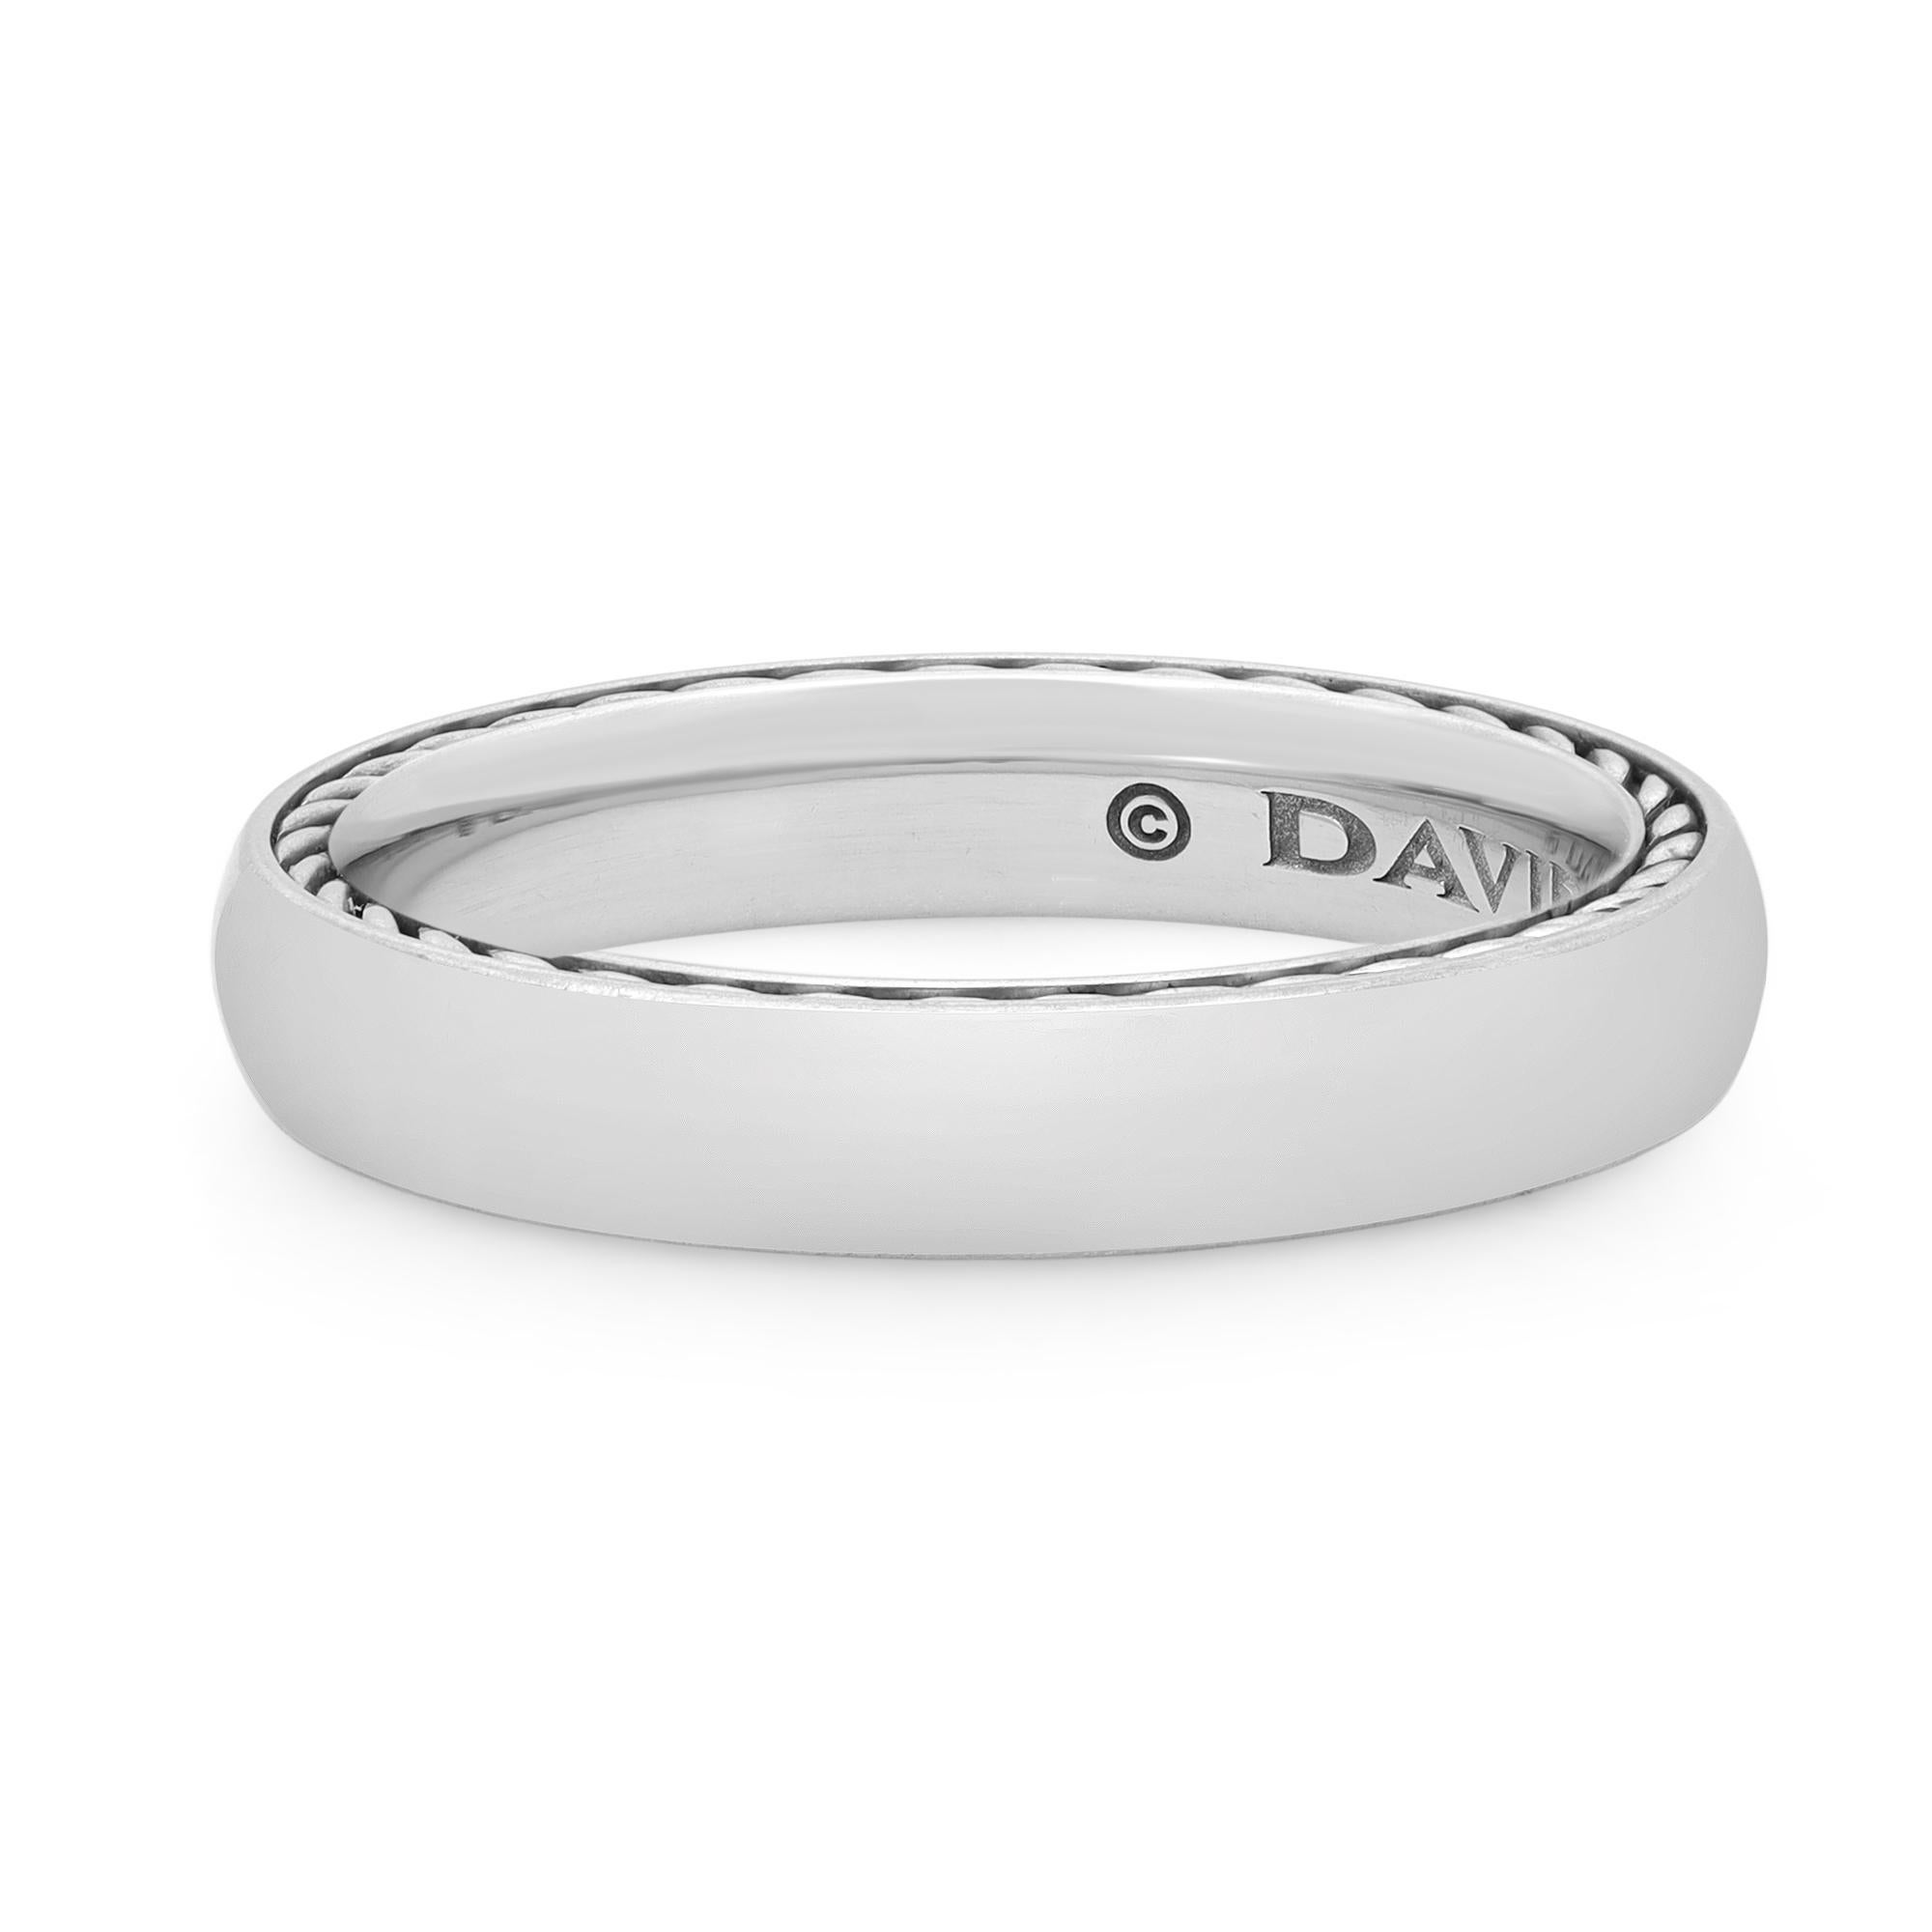 Inspired by clean lines and smooth metal surfaces. This David Yurman minimalist design collection is sculpted with engineered precision. Crafted in fine 18K white gold. Ring size: 7.25. Width: 4mm. Total weight: 7.19 grams. Great pre-owned